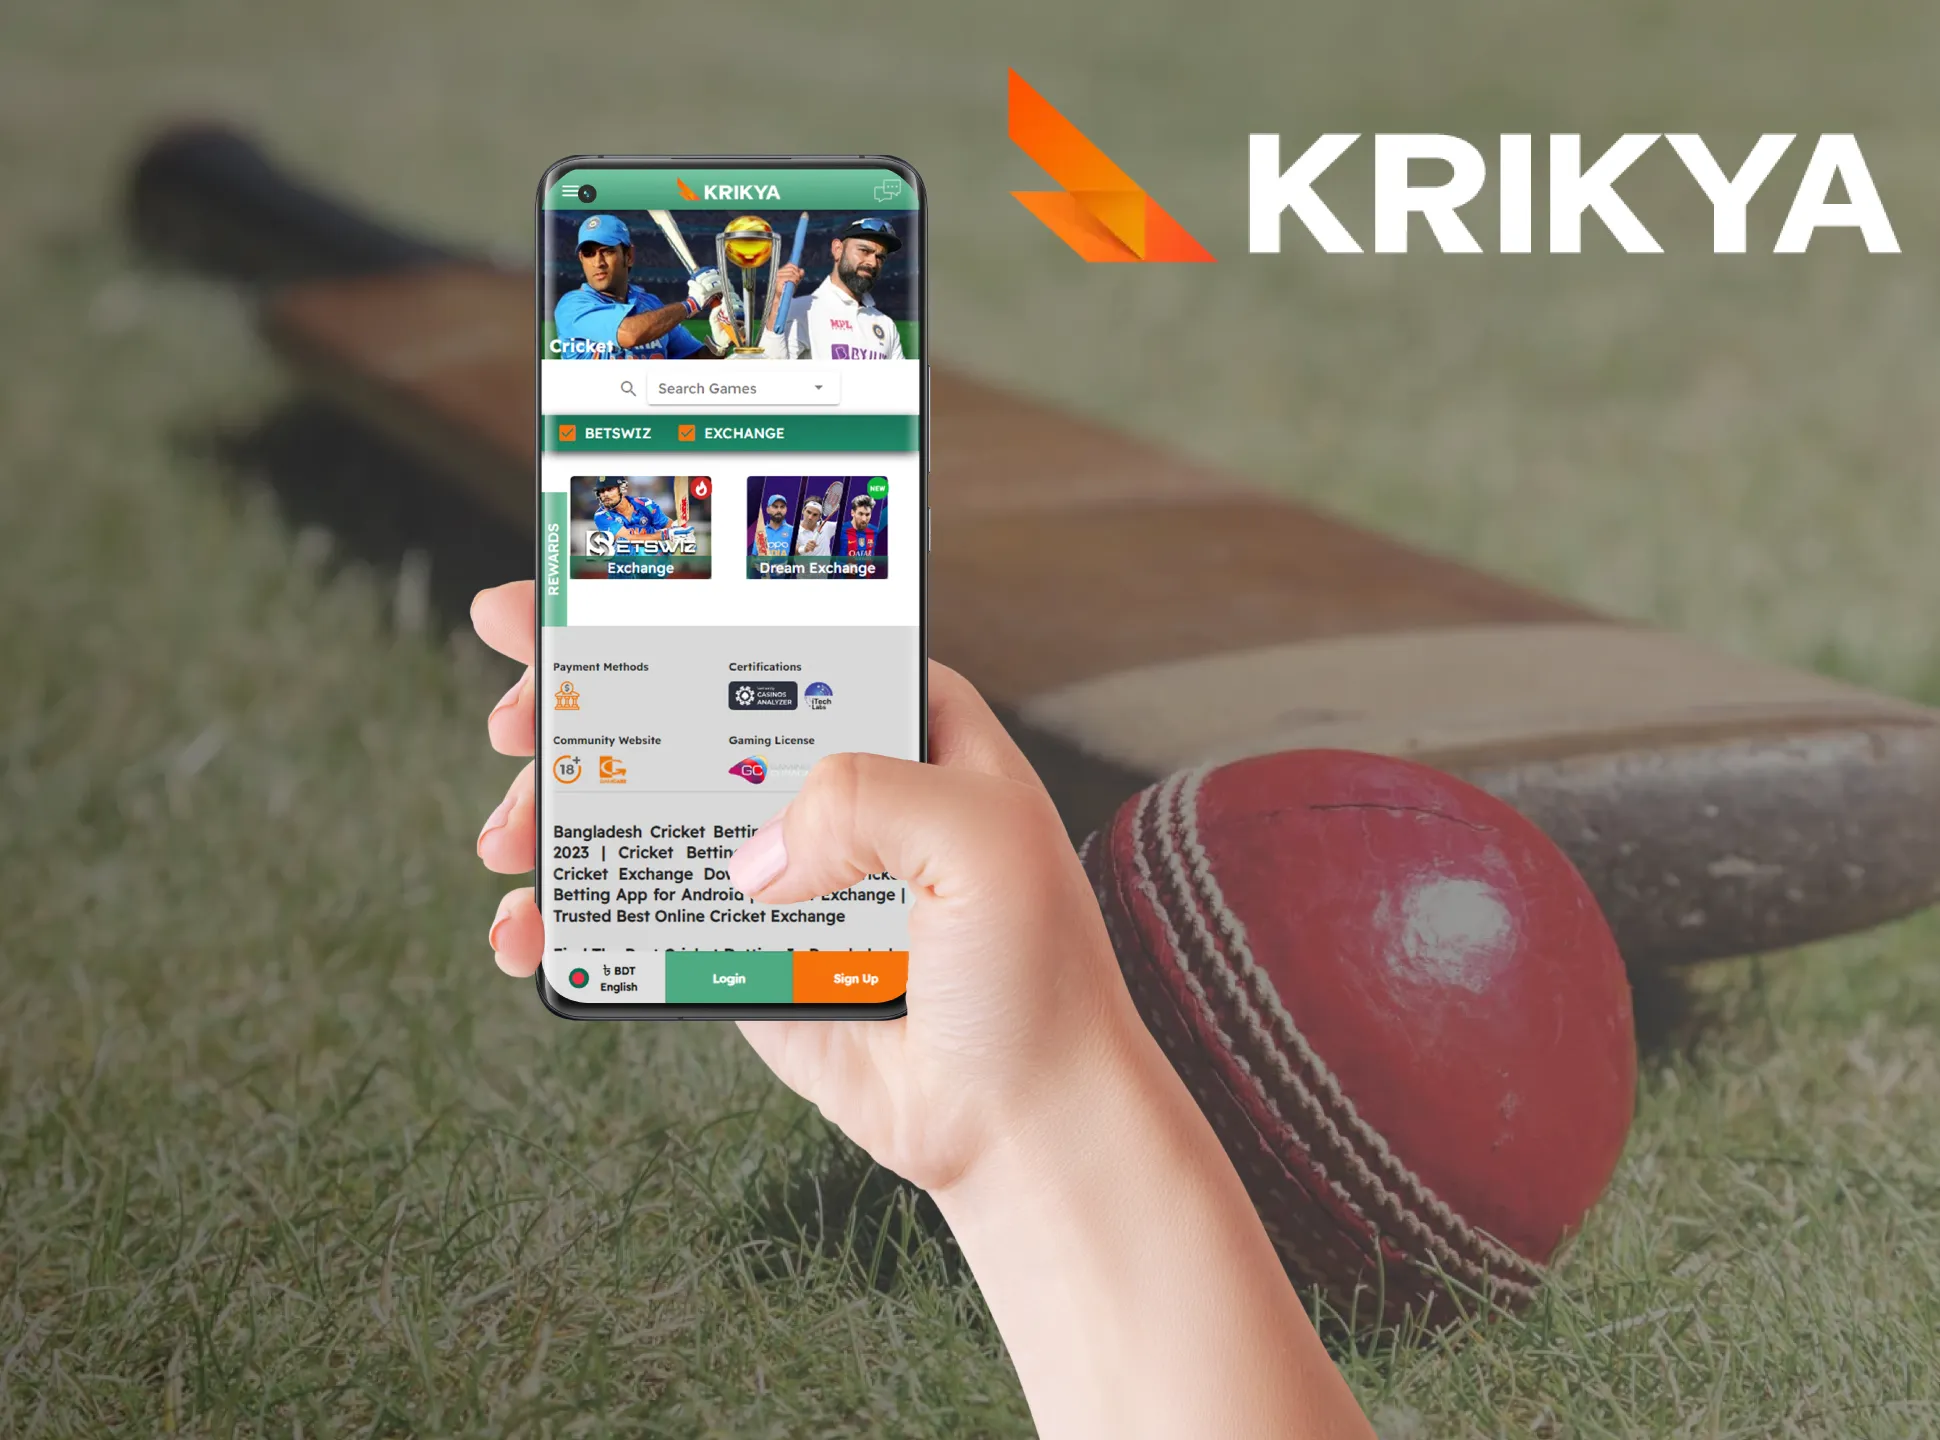 Krikya is a betting site for cricket with high odds.